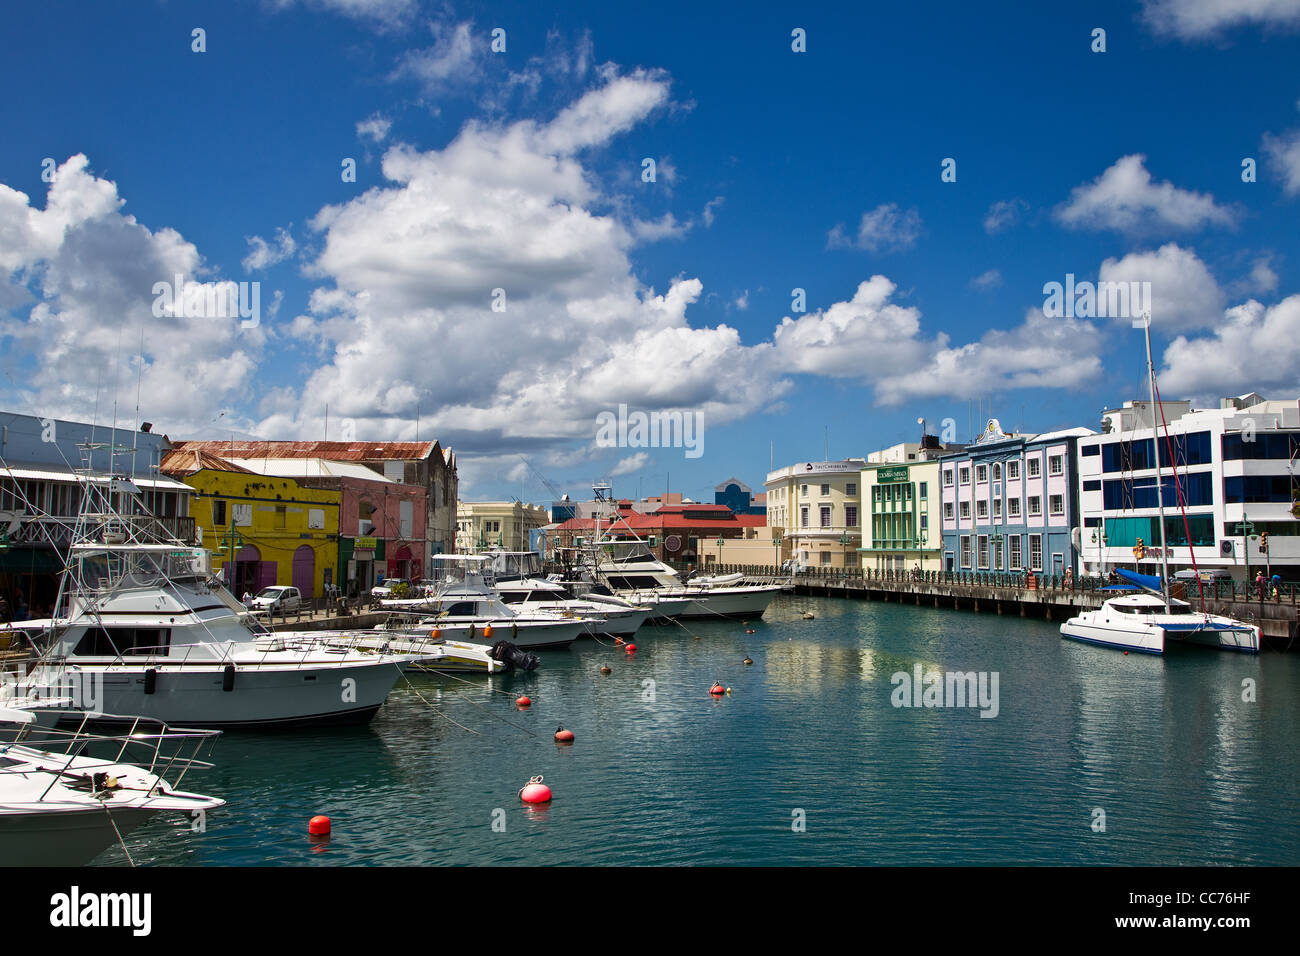 Constitution River, Careenage Bridgetown, Barbade Banque D'Images